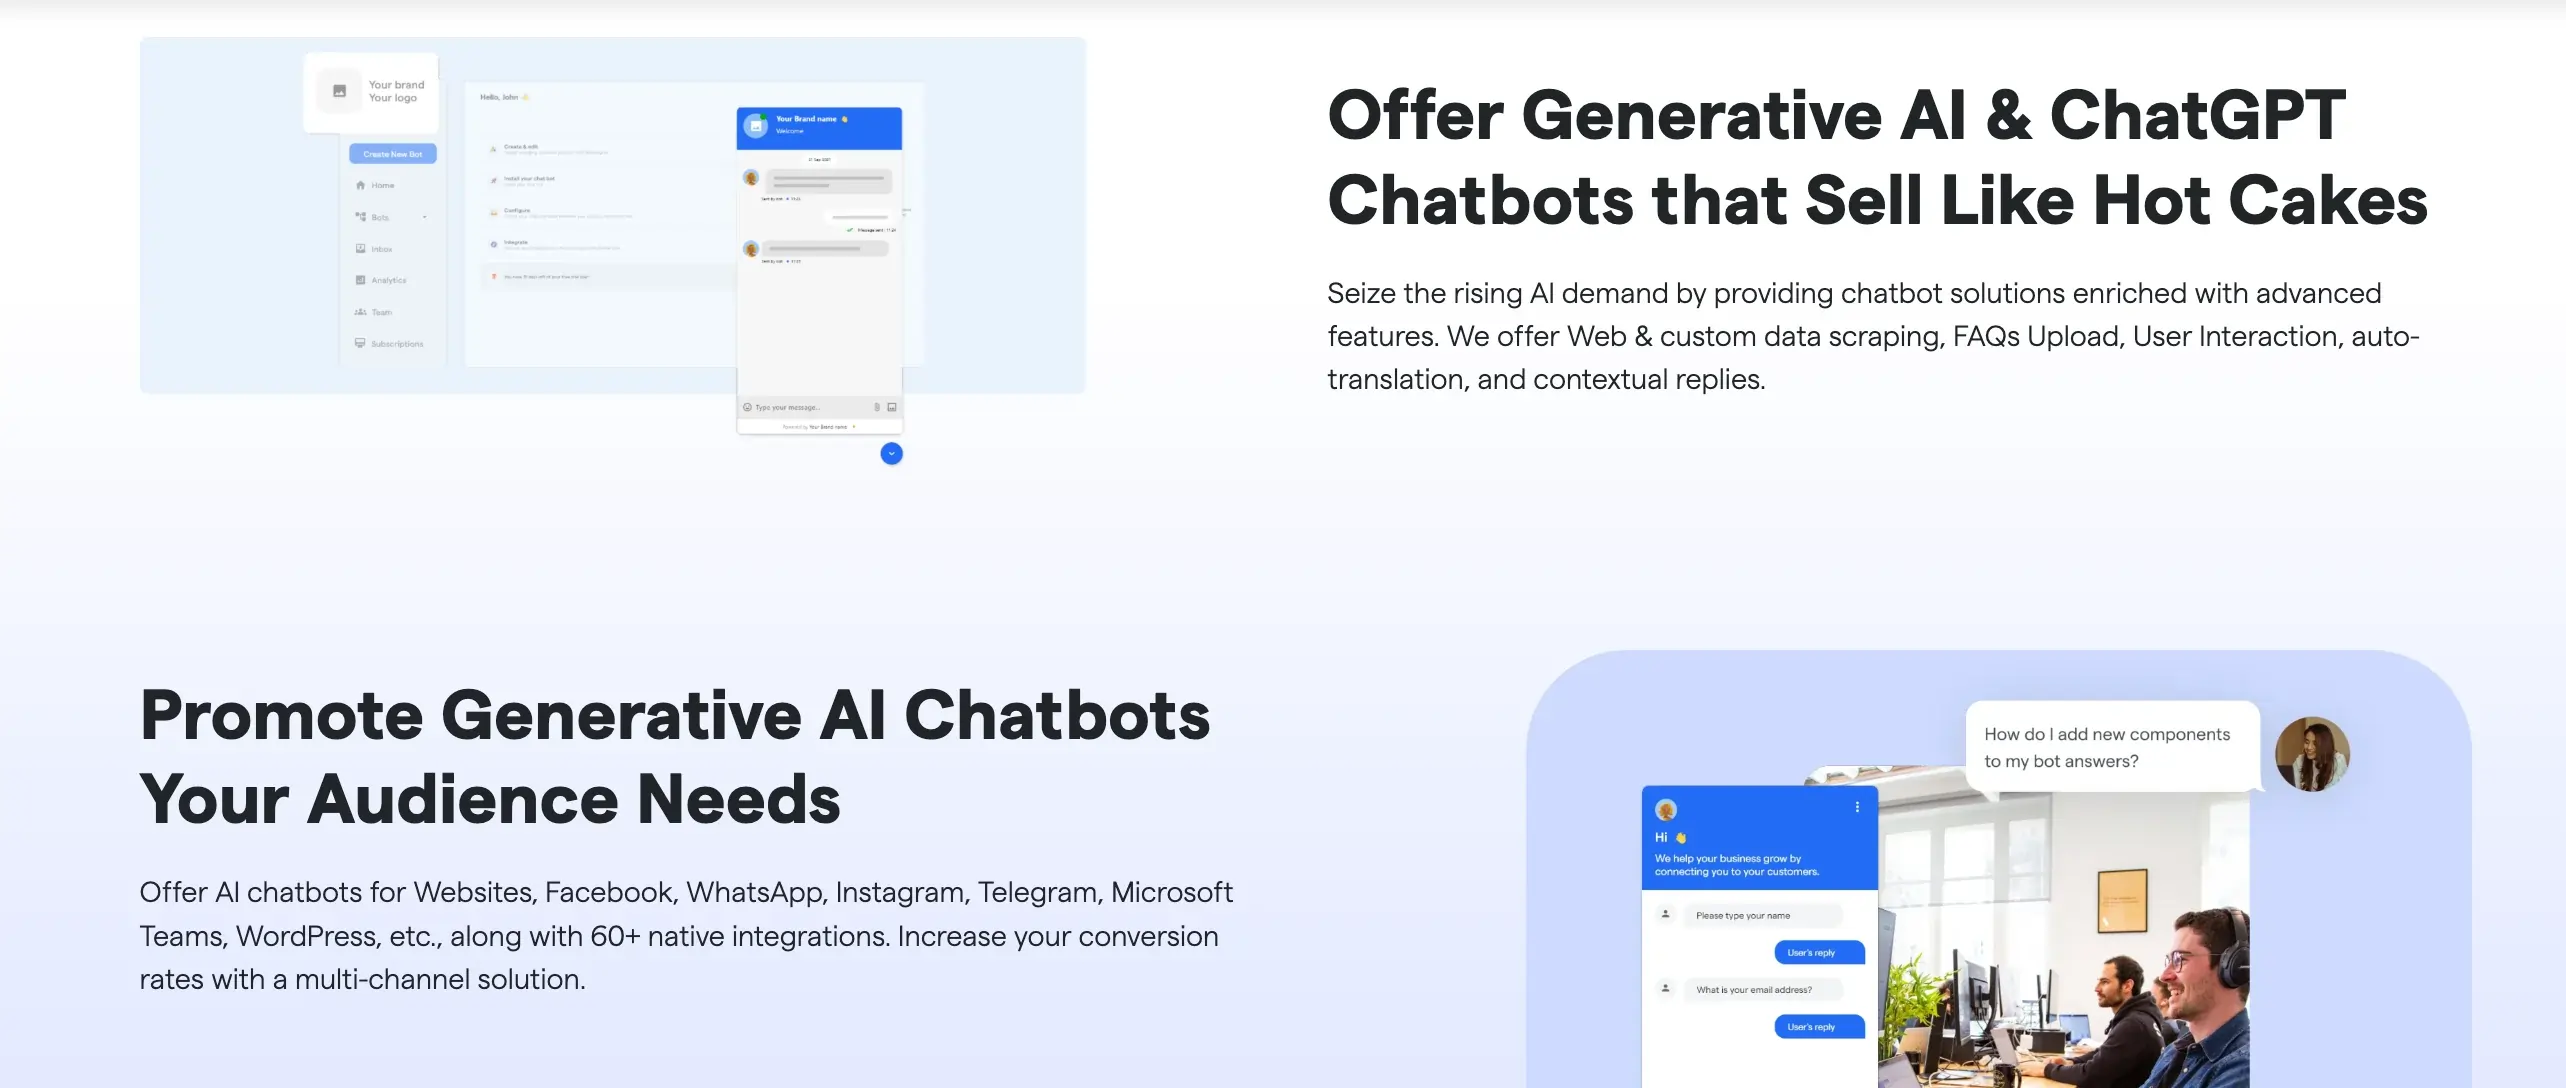 Factors to Consider When Choosing a Chatbot Affiliate Partner